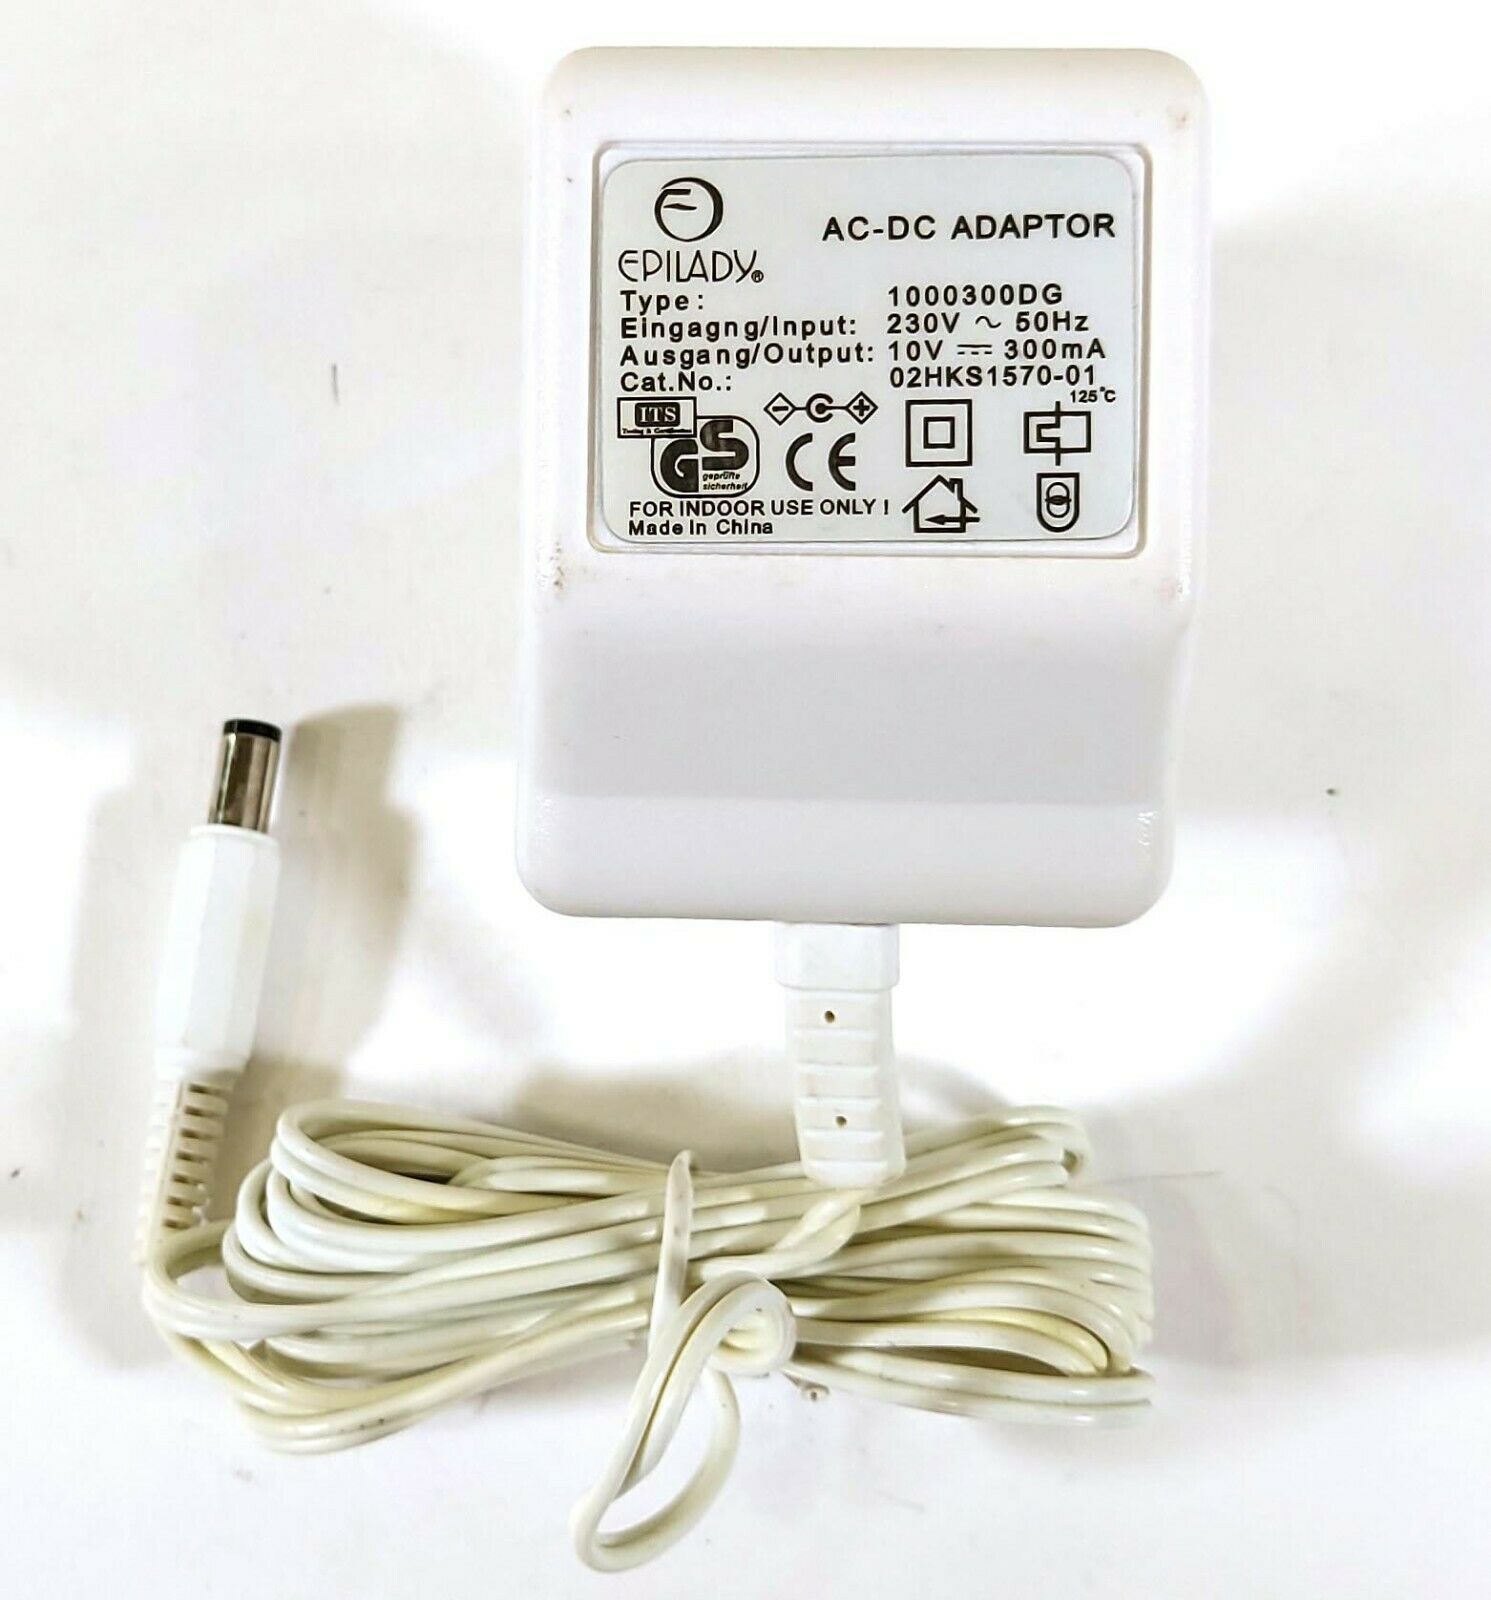 GS Epilady 1000300DG AC/DC Adapter 10V 300mA Original Charger Power Supply D274 Output Current: 30